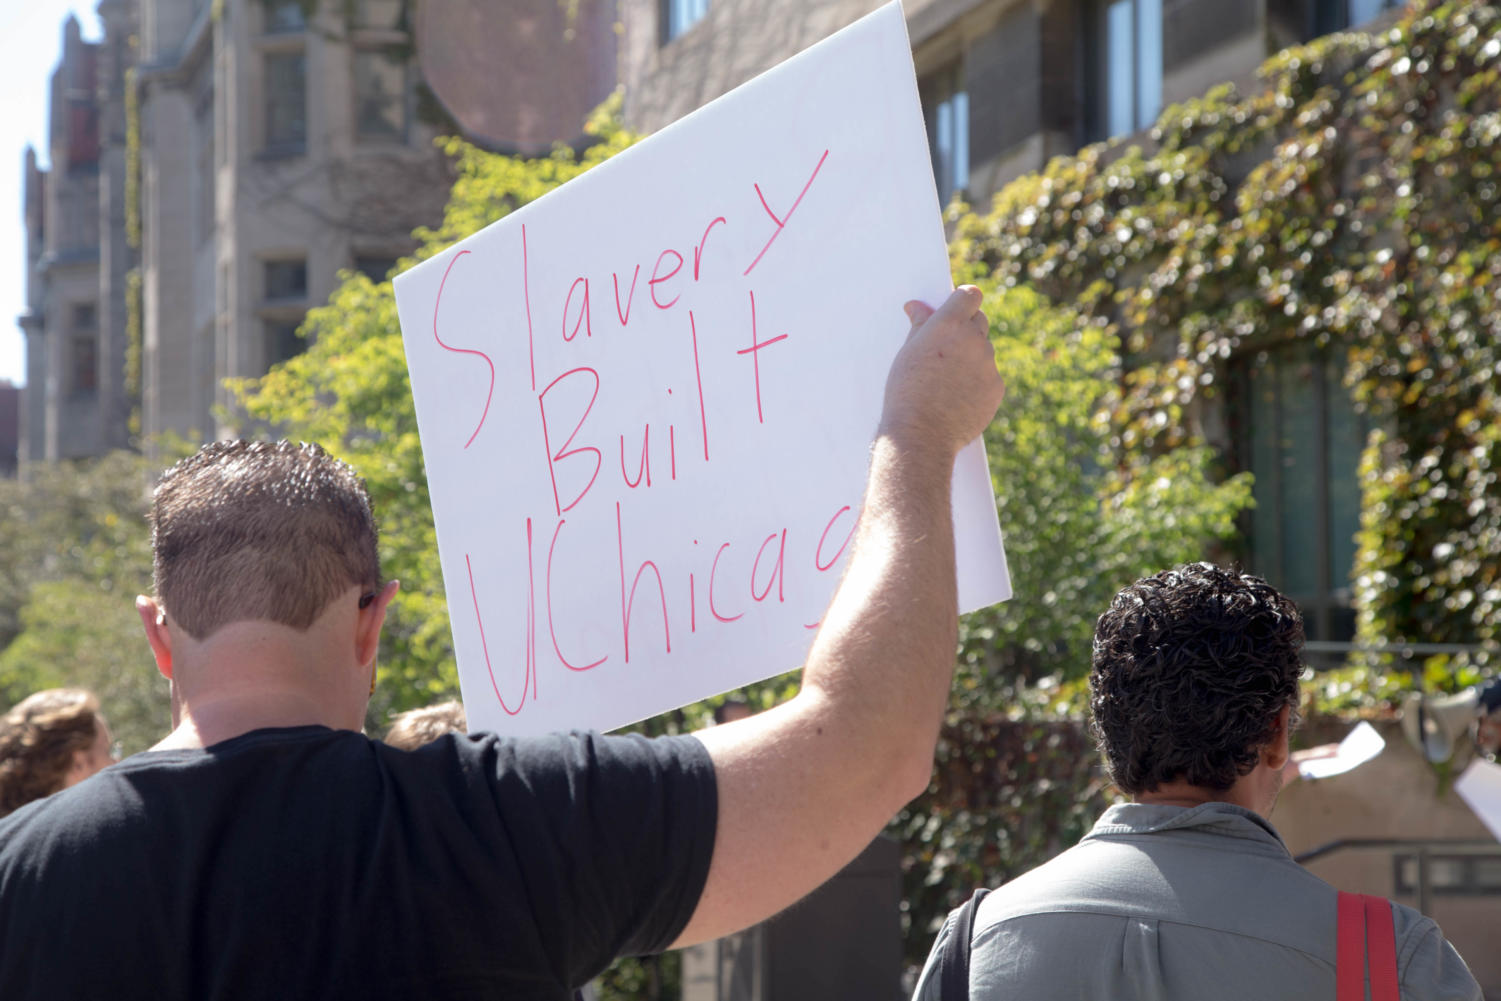 The Reparations at UChicago Working Group participated in a racial justice Rally on campus in October.